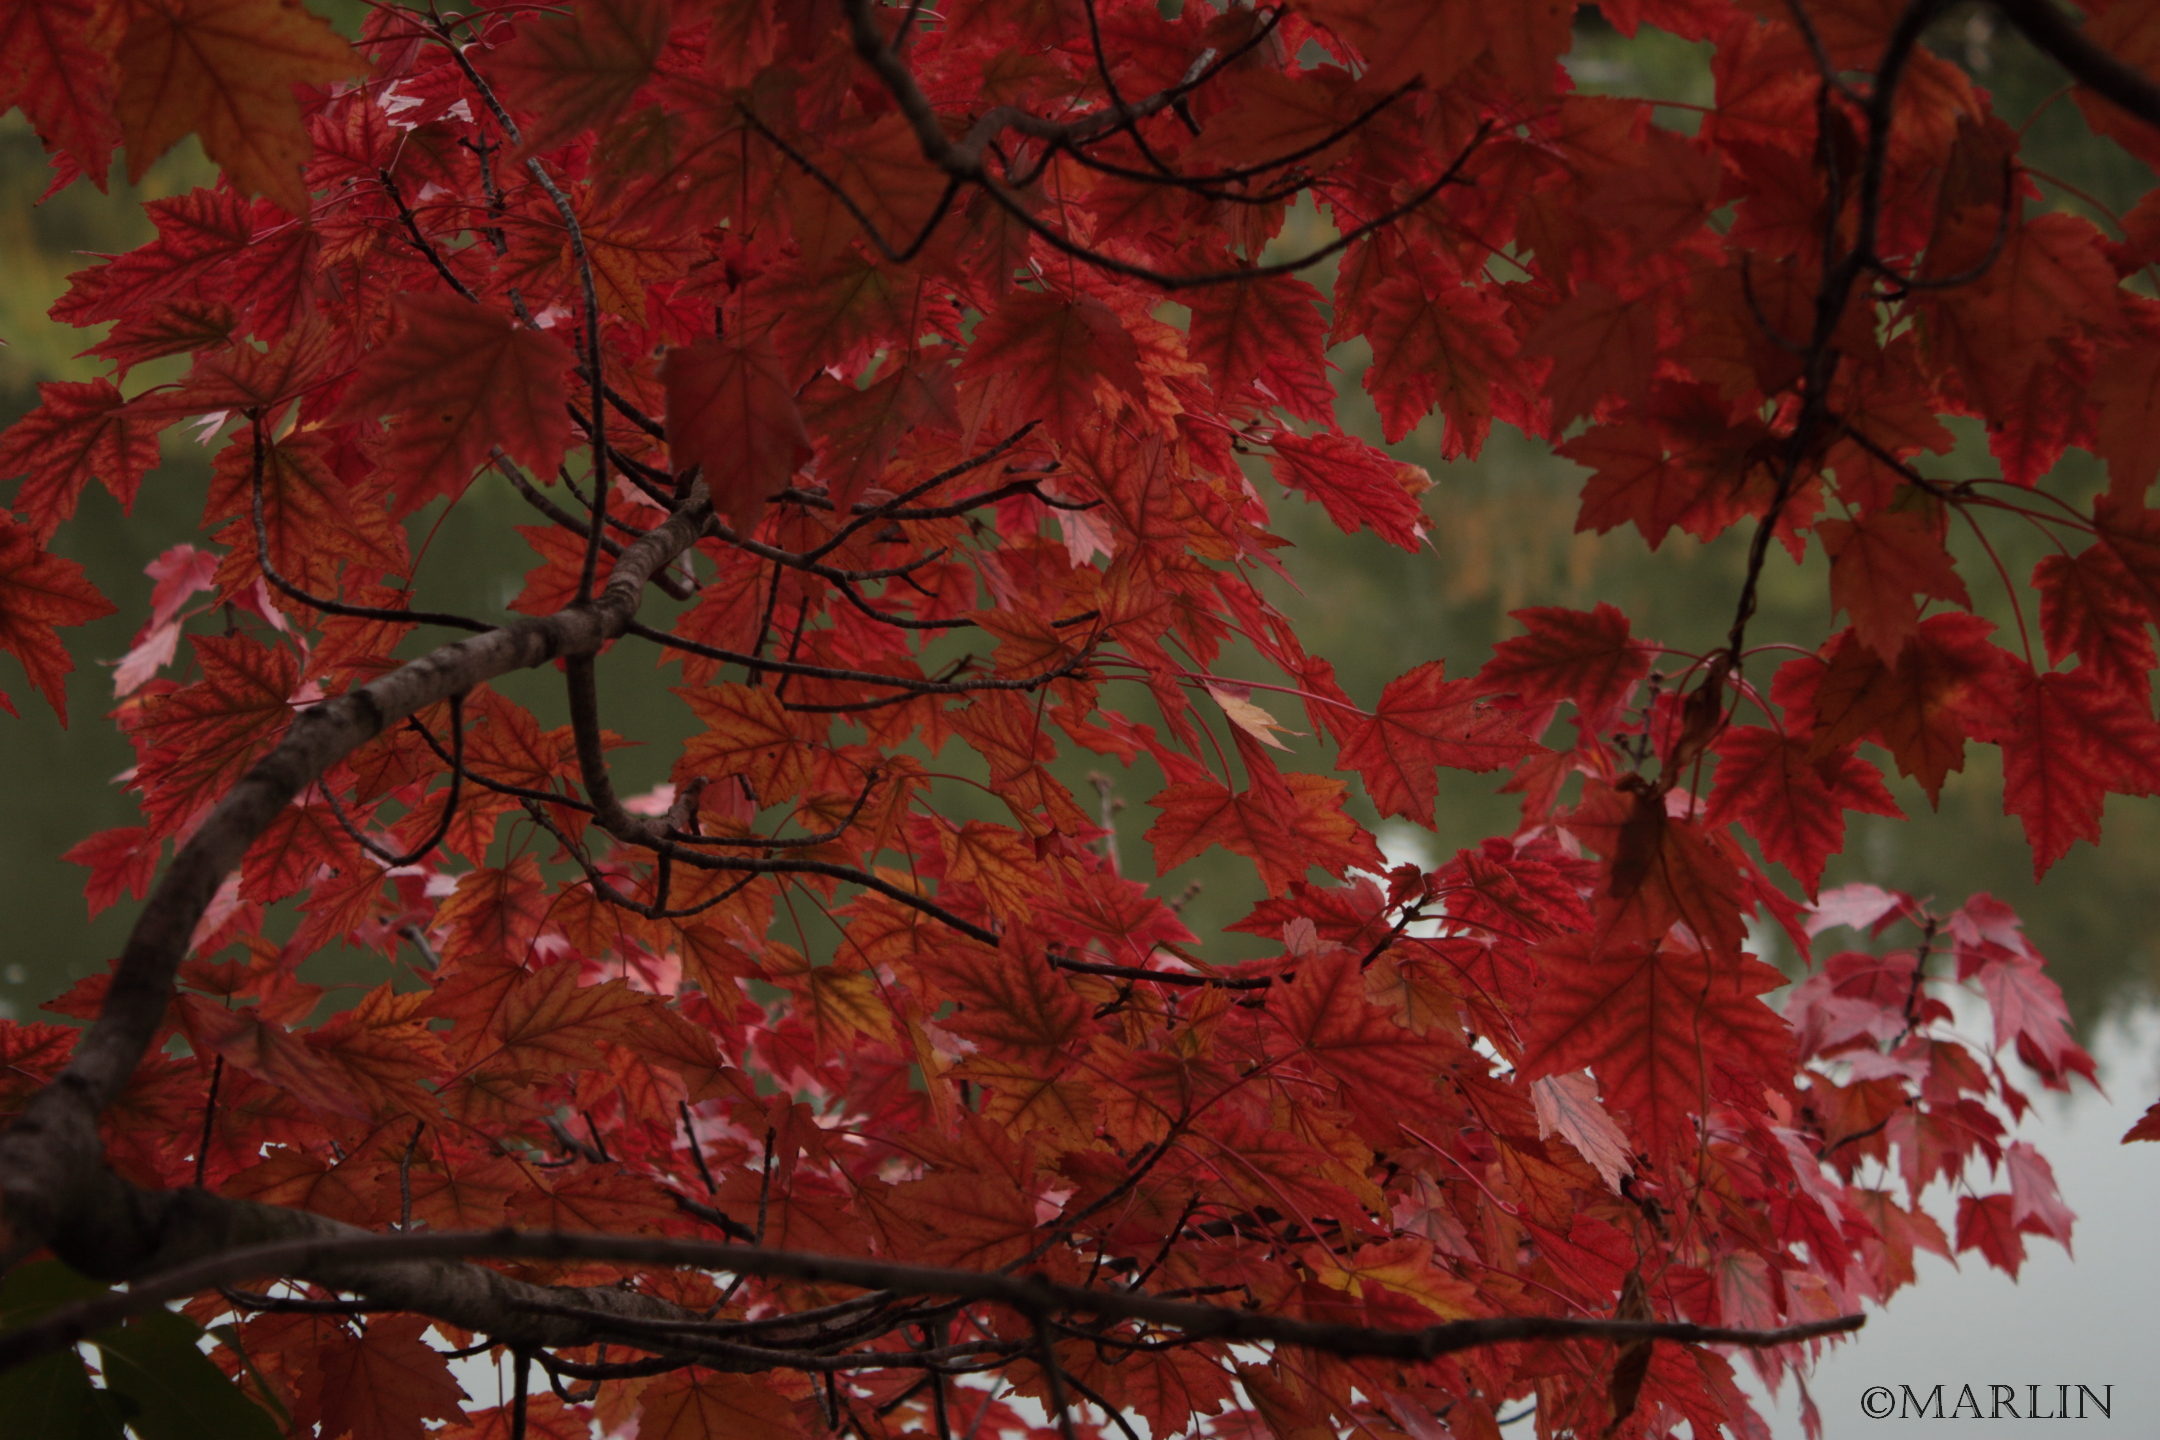 Autumn Flame Red Maple